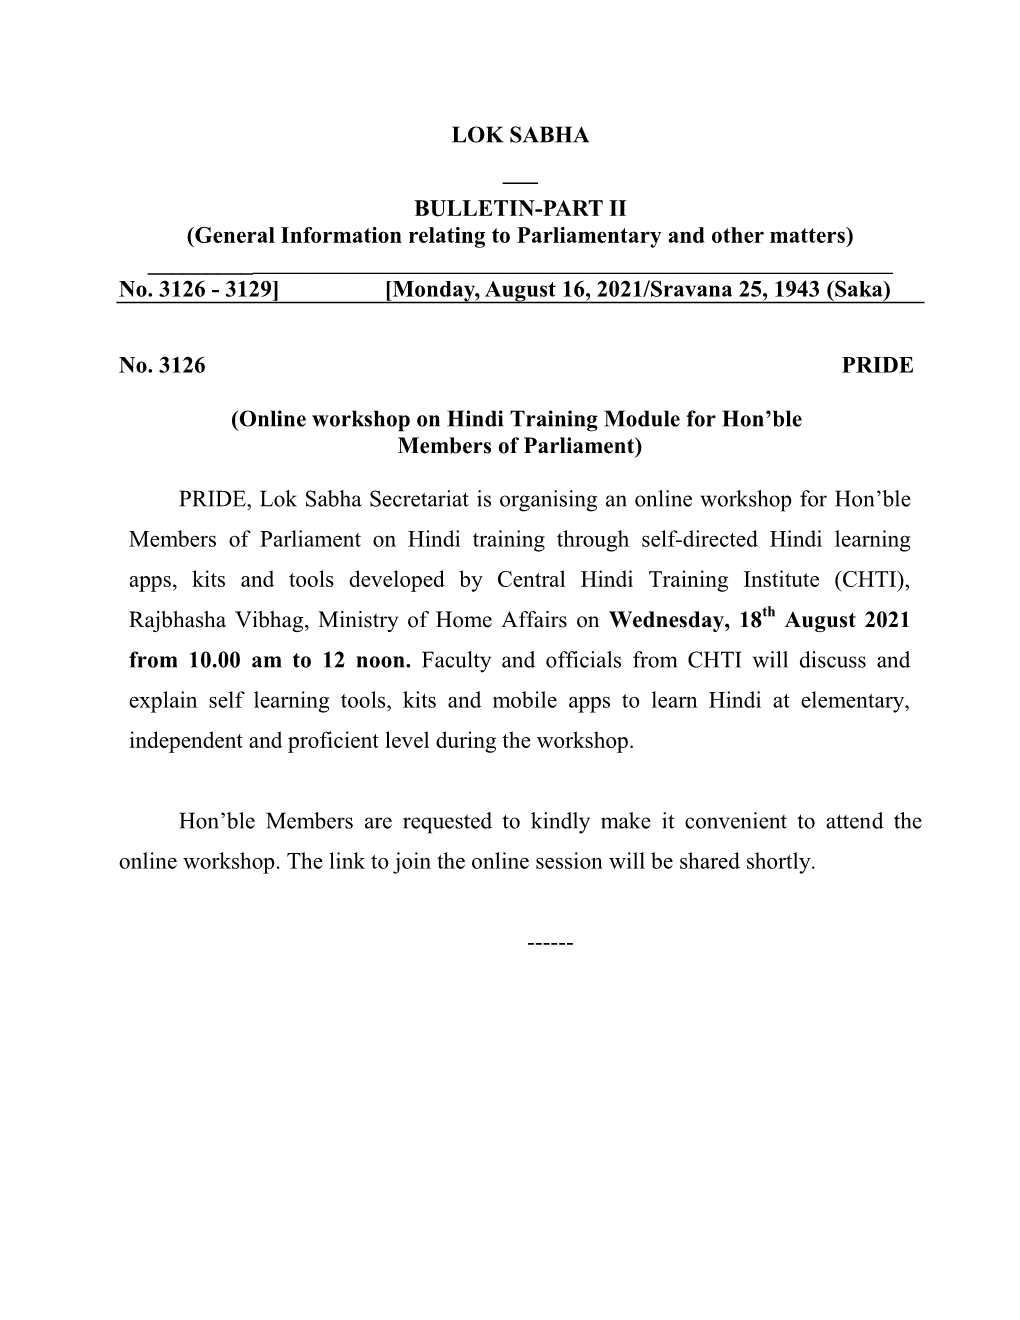 LOK SABHA ___ BULLETIN-PART II (General Information Relating to Parliamentary and Other Matters) ______No